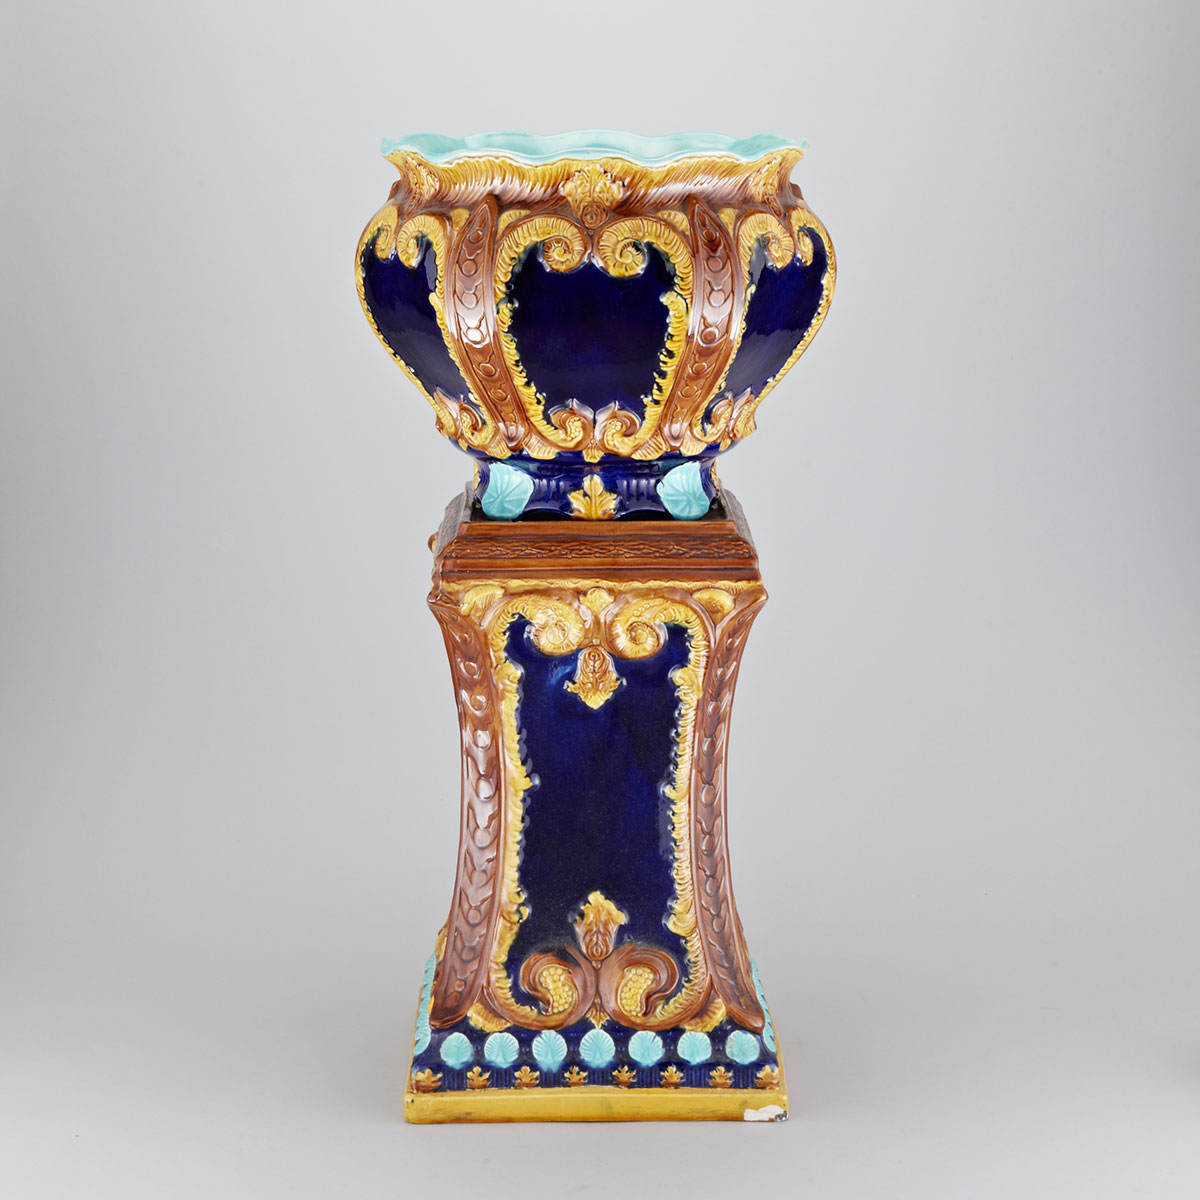 Wardle Majolica Jardinière and Stand, c.1900